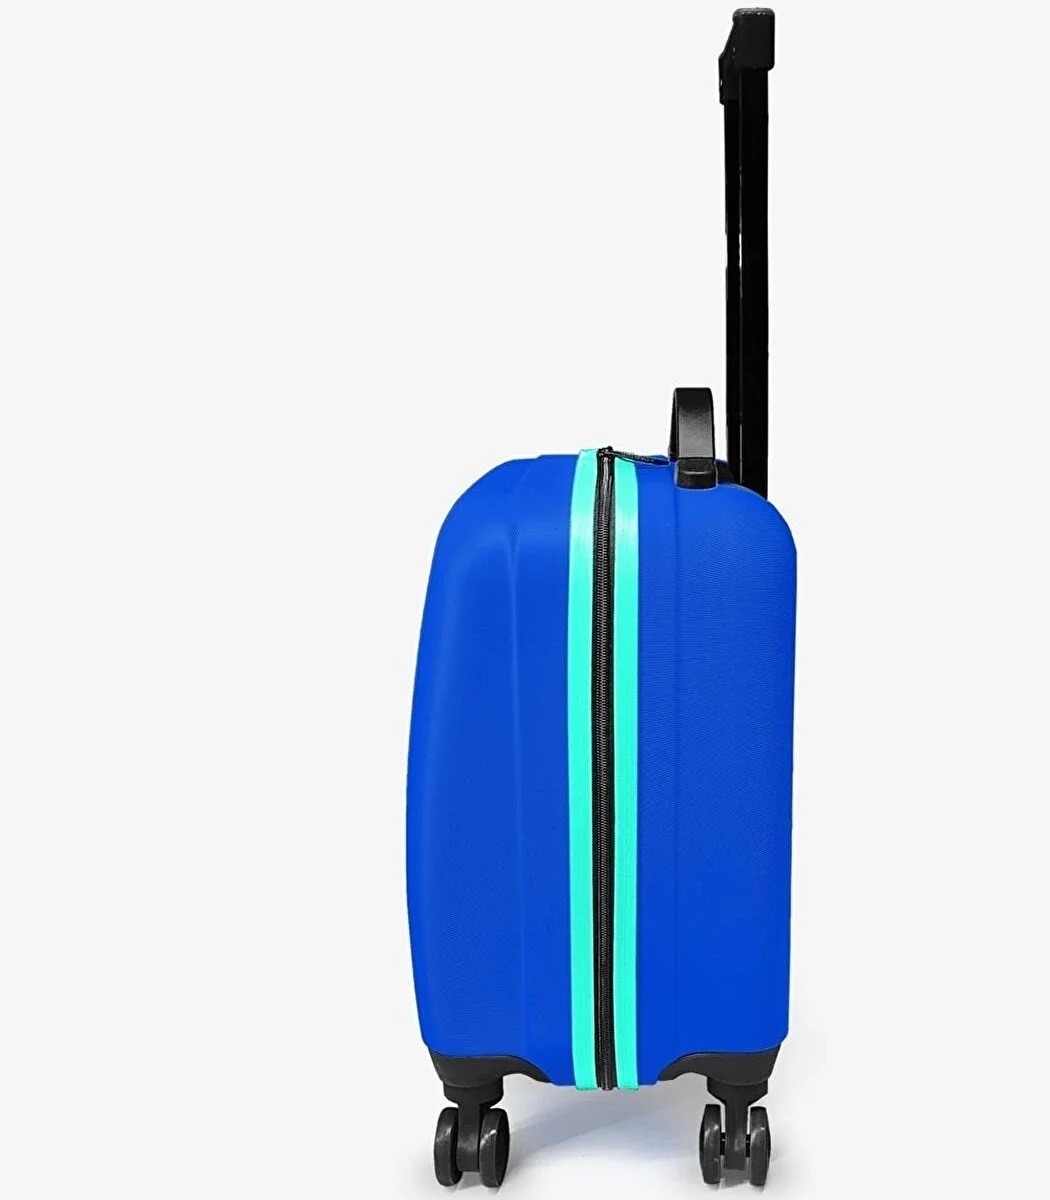 Coral High Kids Luggage suitcase - Sax